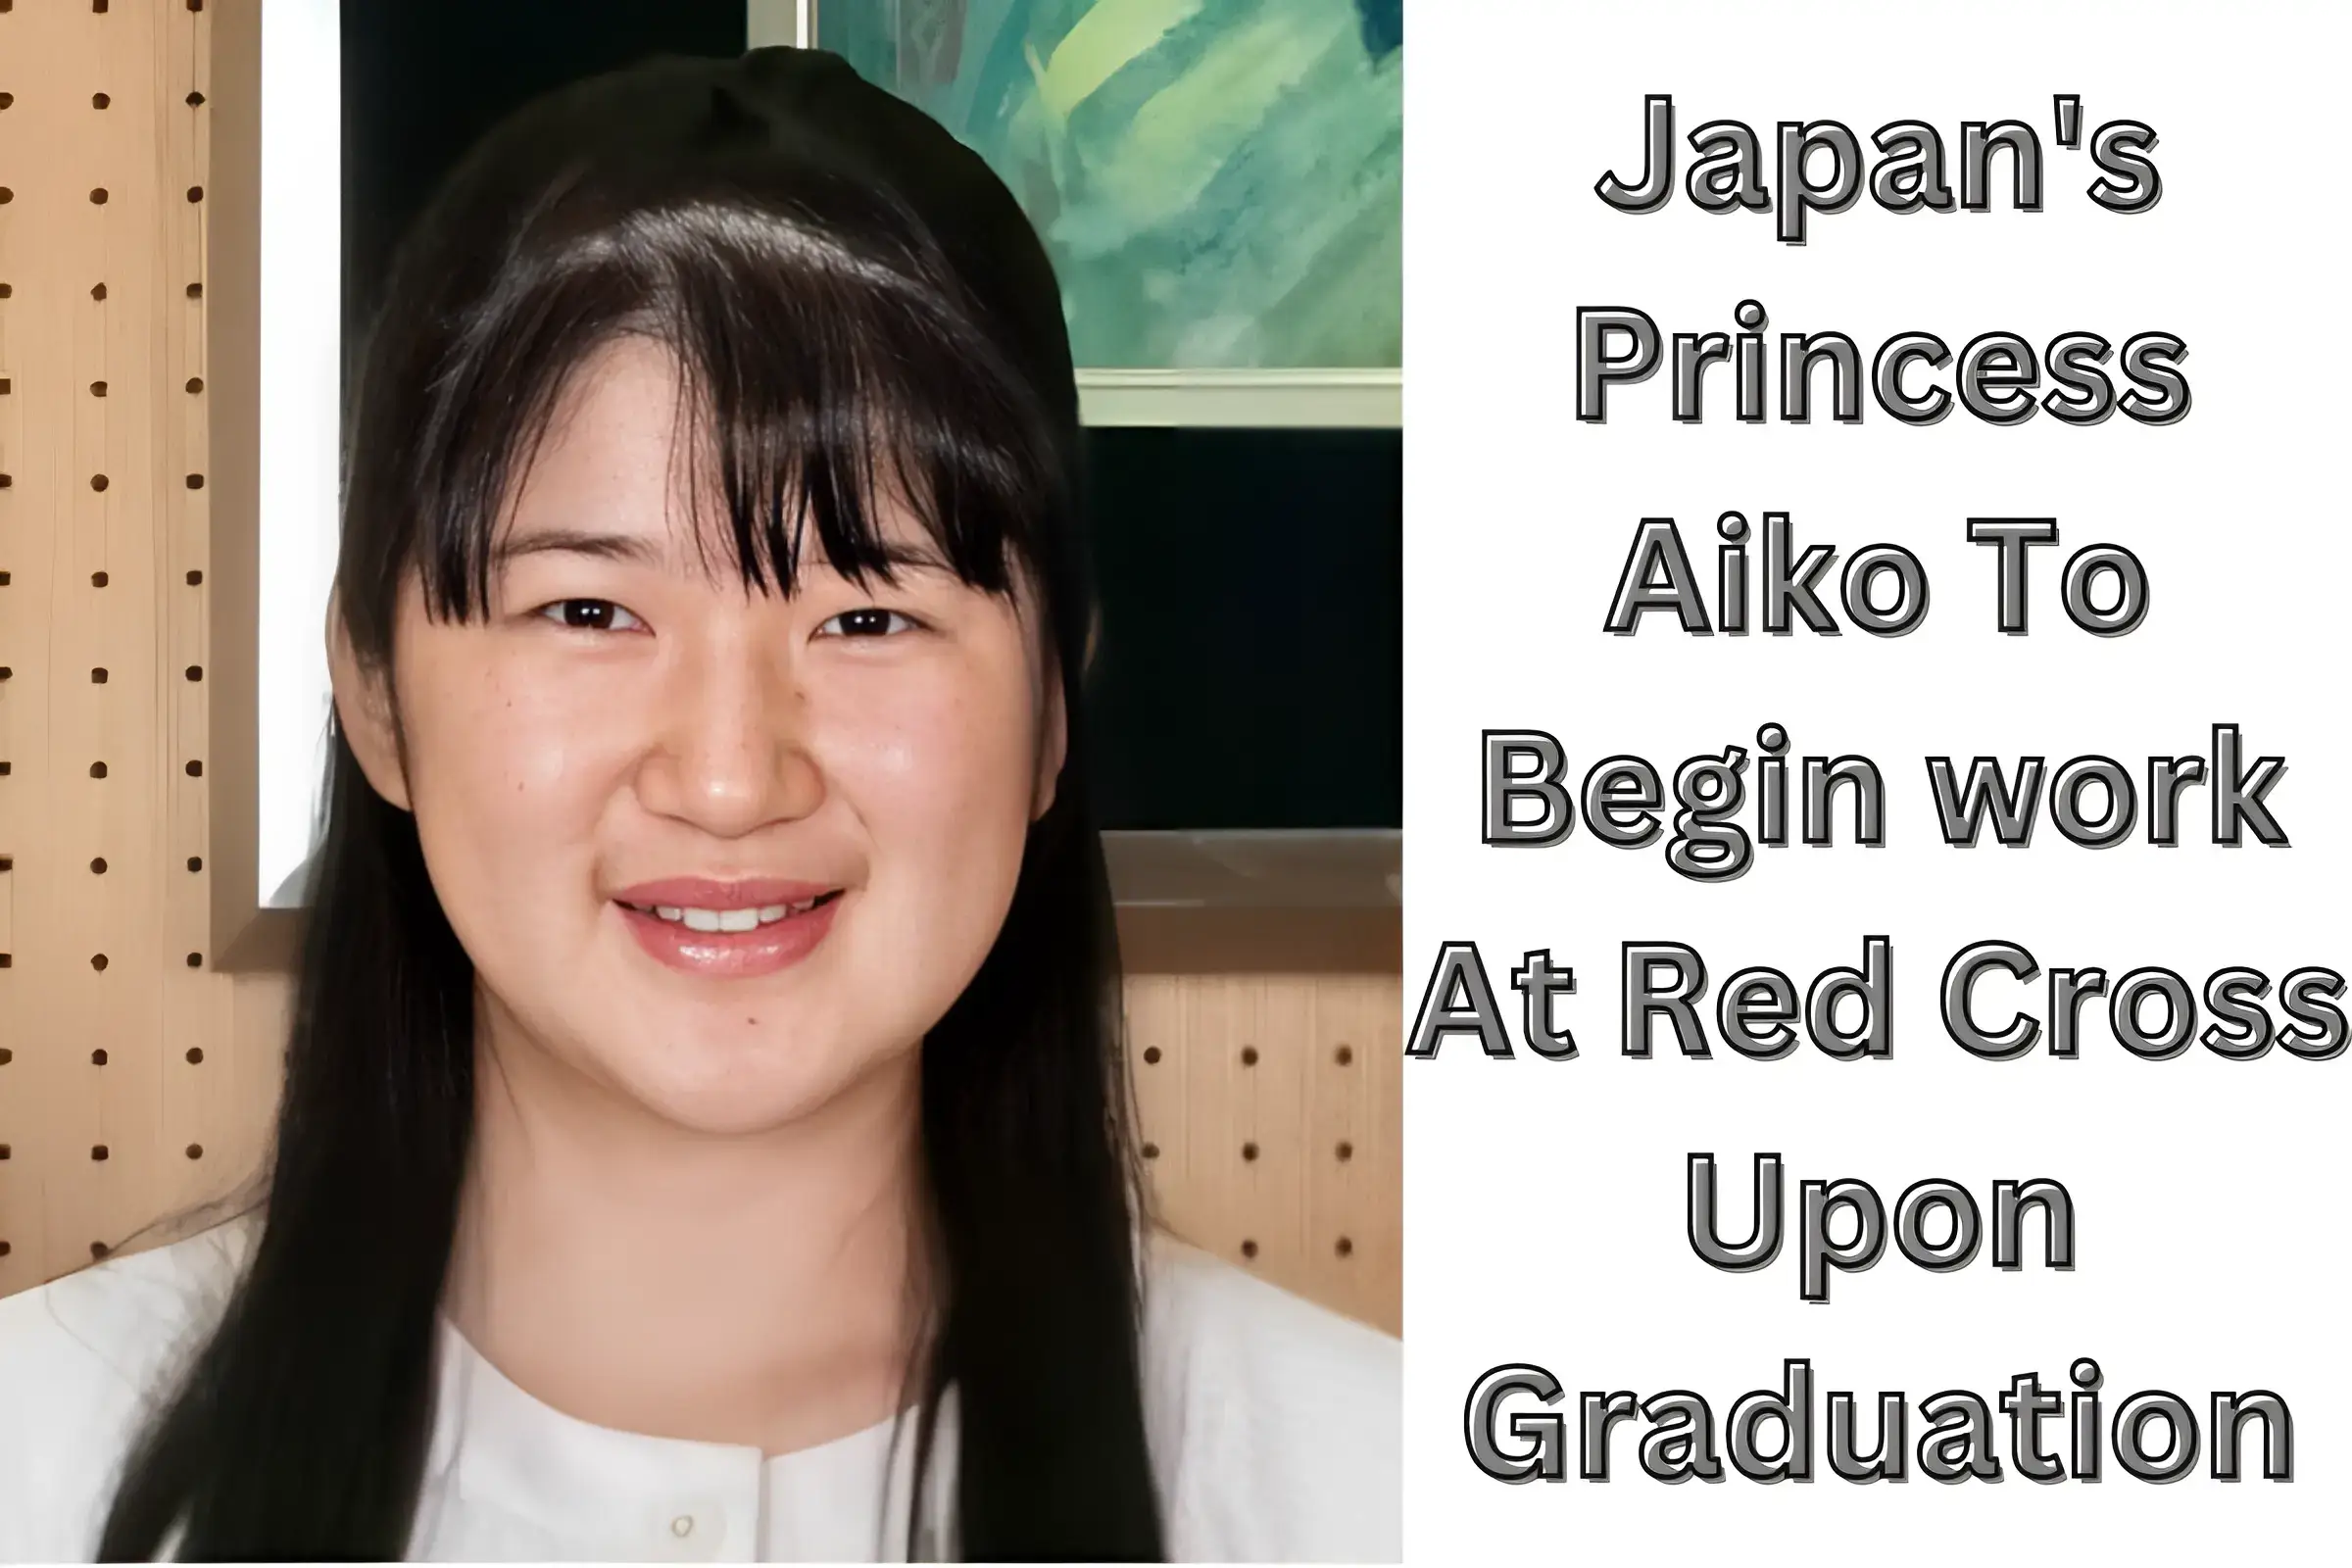 The Next Chapter of Princess Aiko's Story: Graduation Leads to a Caring Position at Red Cross